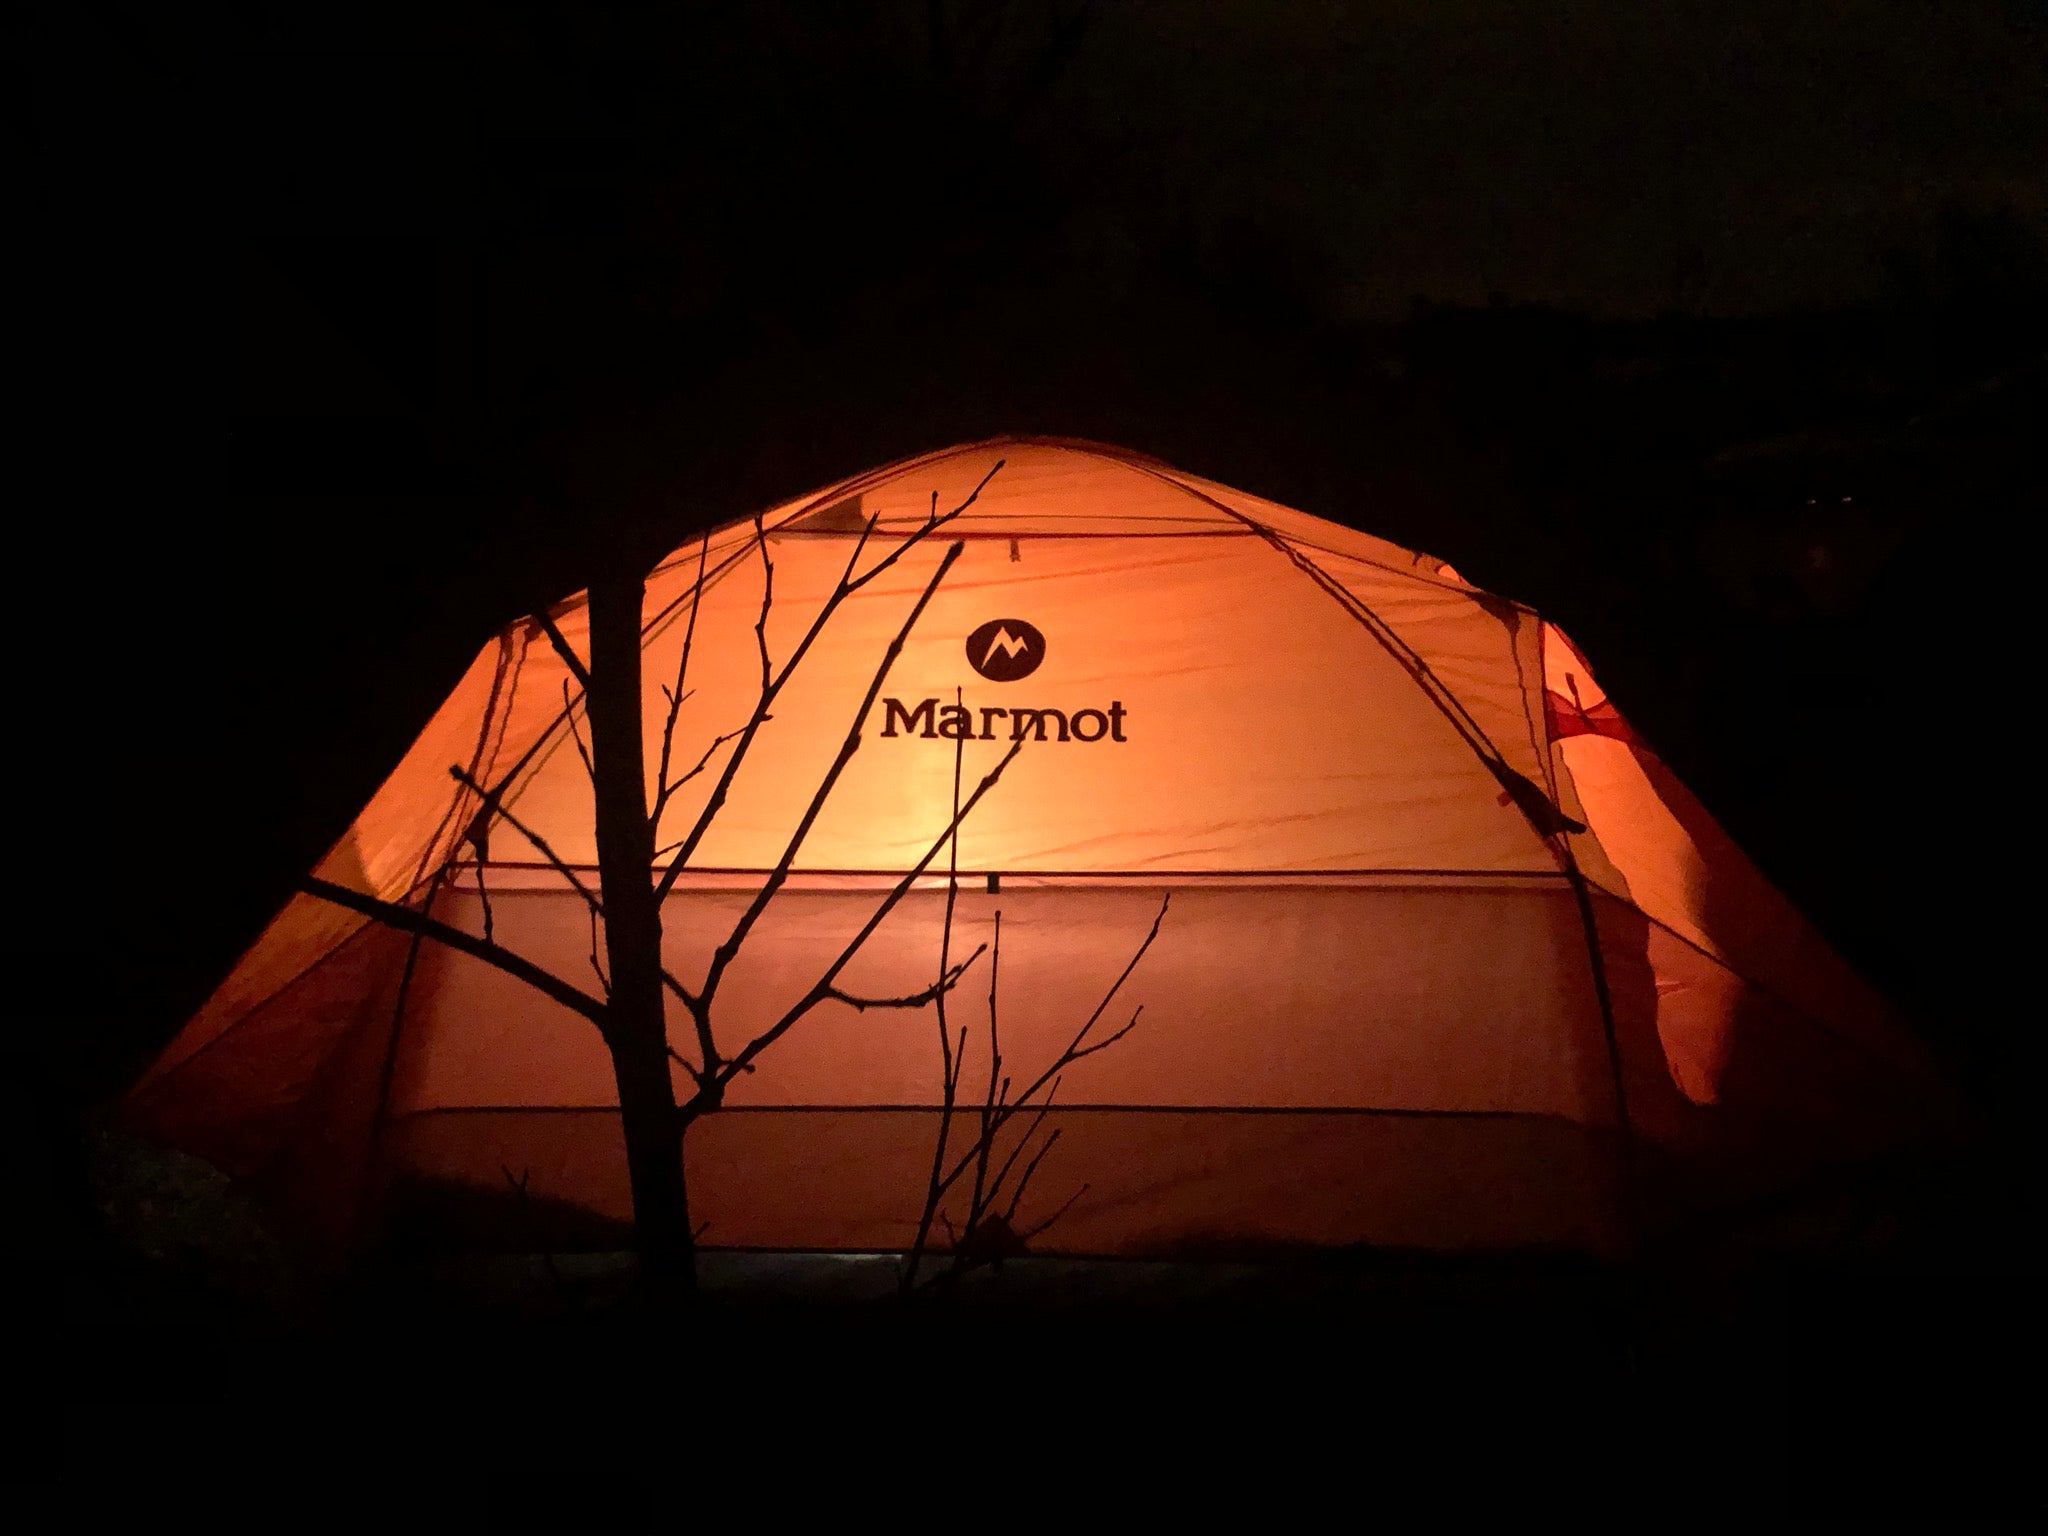 Only tent camping on a chilly April night